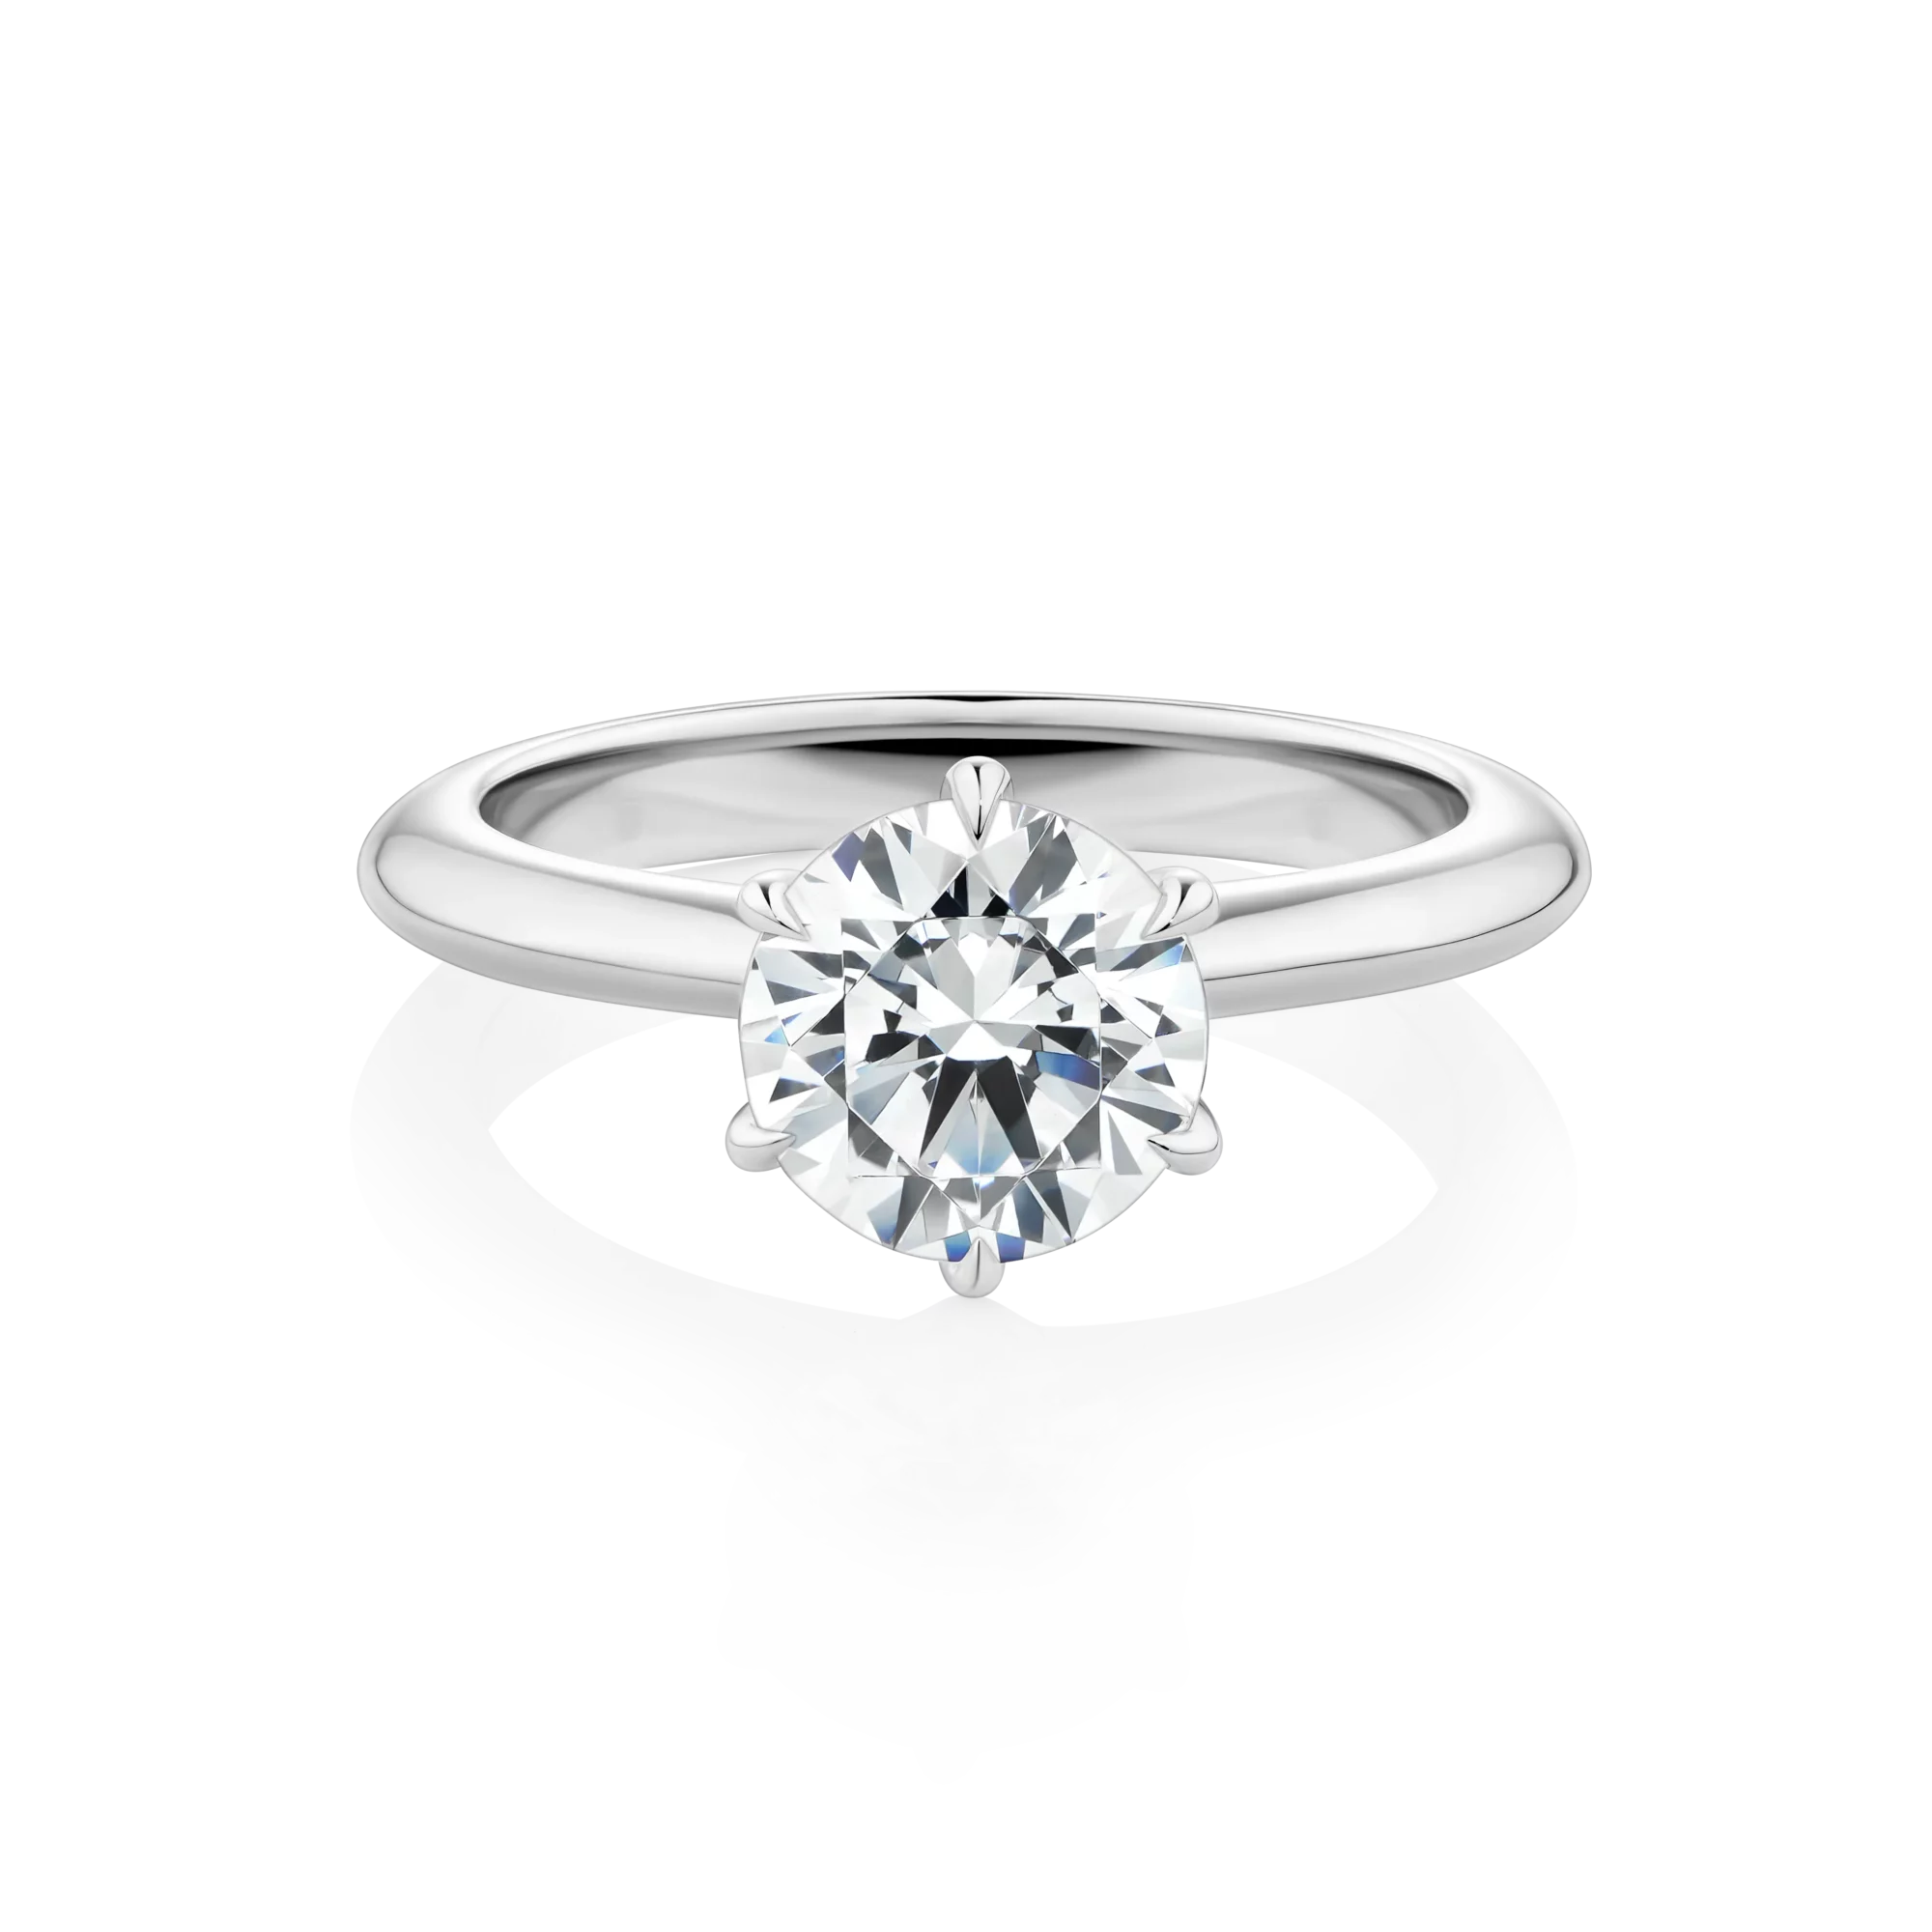 Southern-Star-Platinum-6-claw-Round-Cut-Diamond-Engagement-Ring